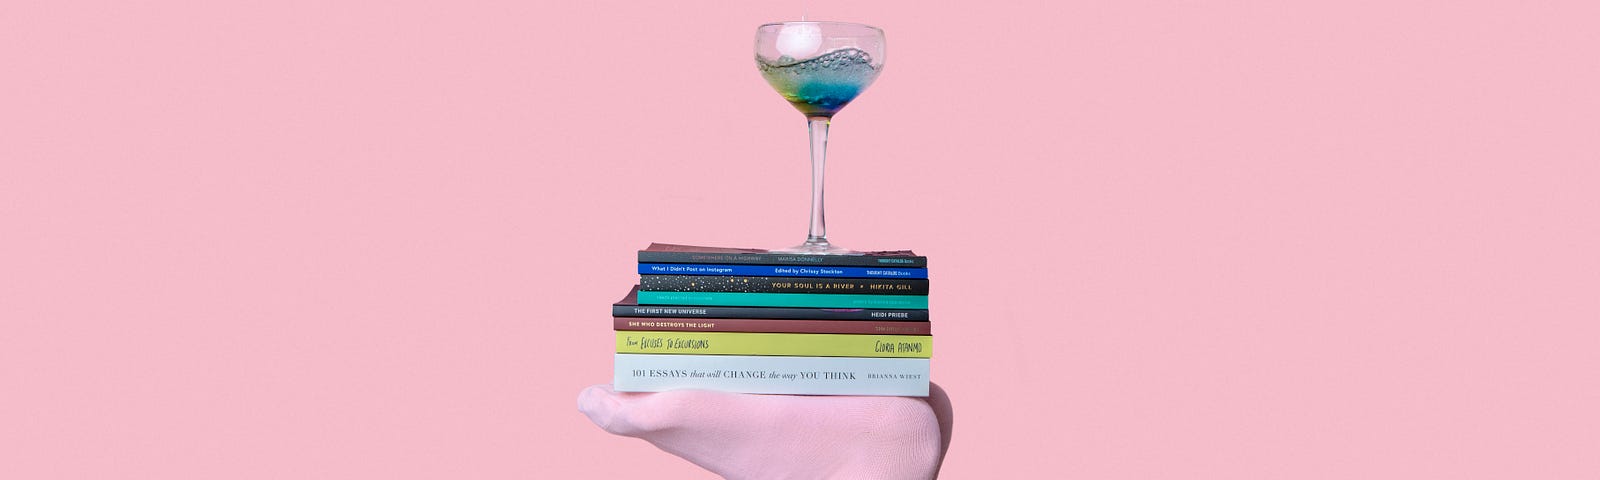 Person balancing books on their feet with a glass of water on top of the books, there is a pink background